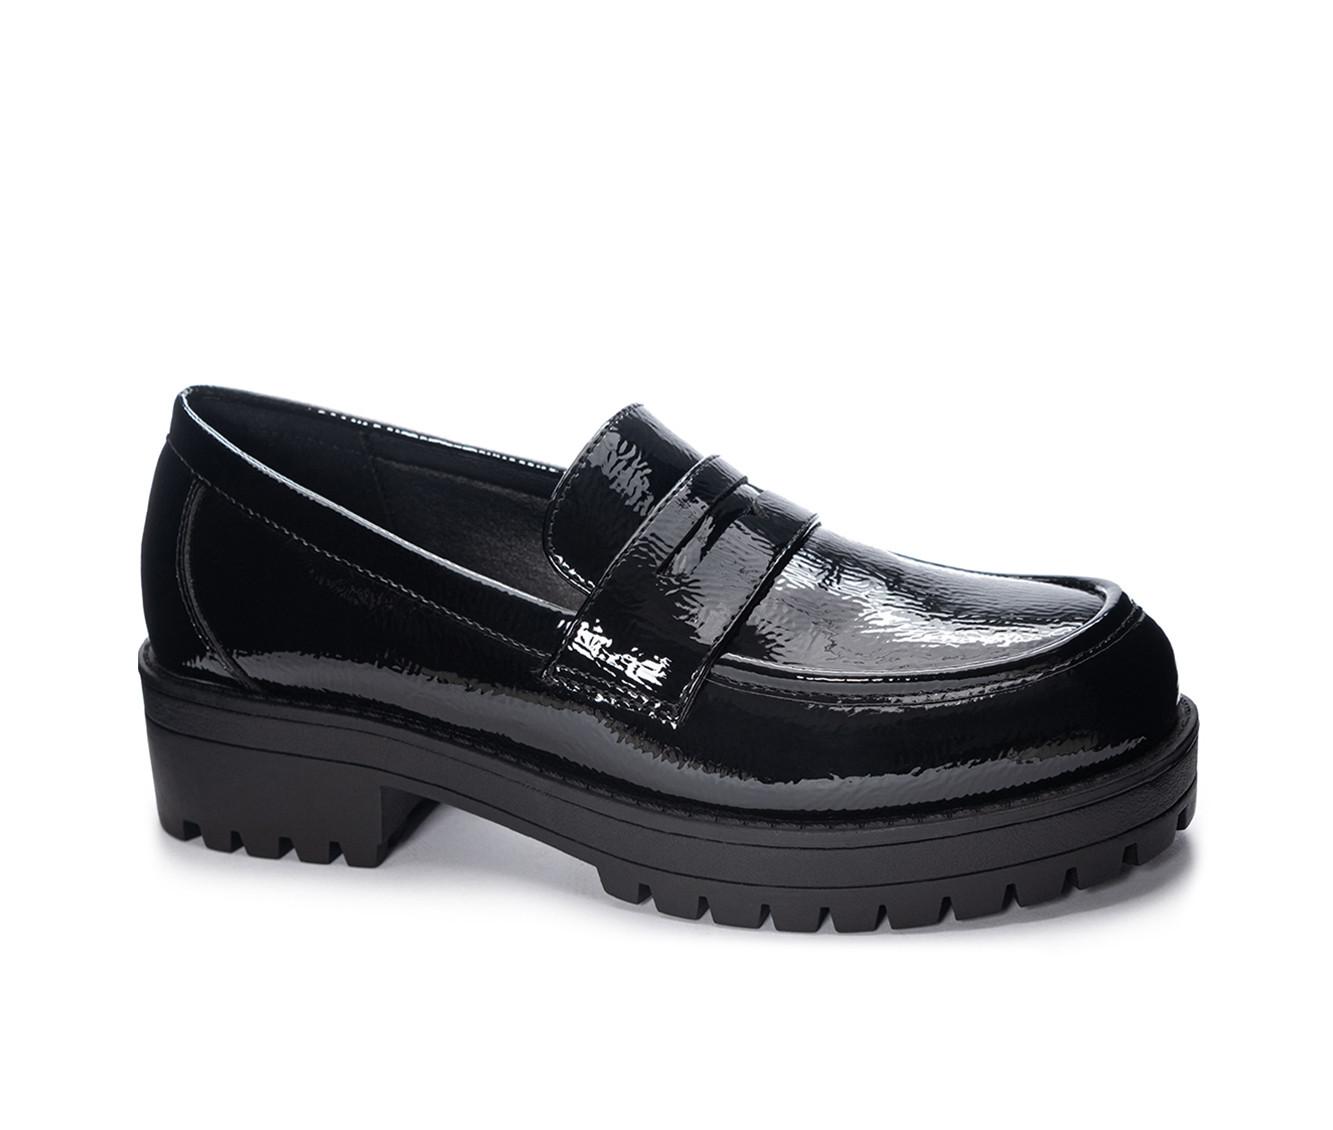 Women's Dirty Laundry Voidz Heeled Loafers